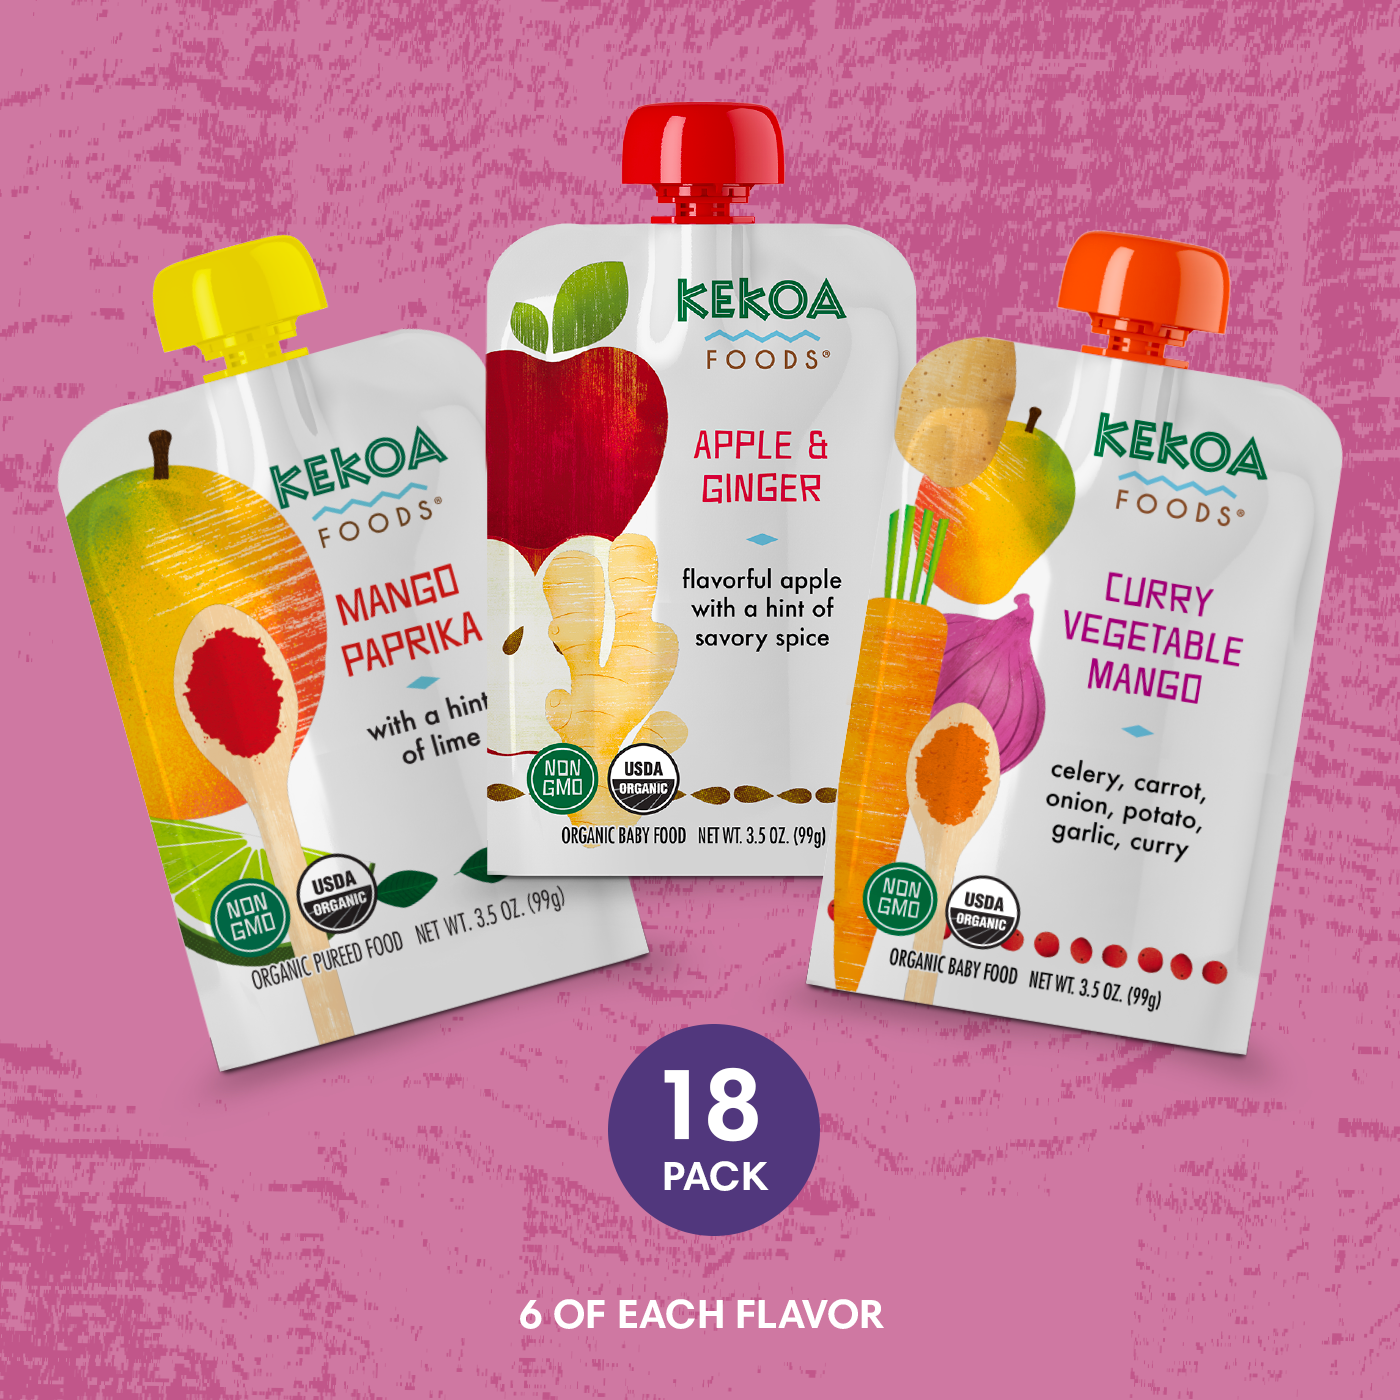 An image of three Kekoa Foods baby food pouches, each with different vibrant colors and unique flavor combinations - Apple & Ginger, Curry Vegetable Mango, and Mango Paprika.